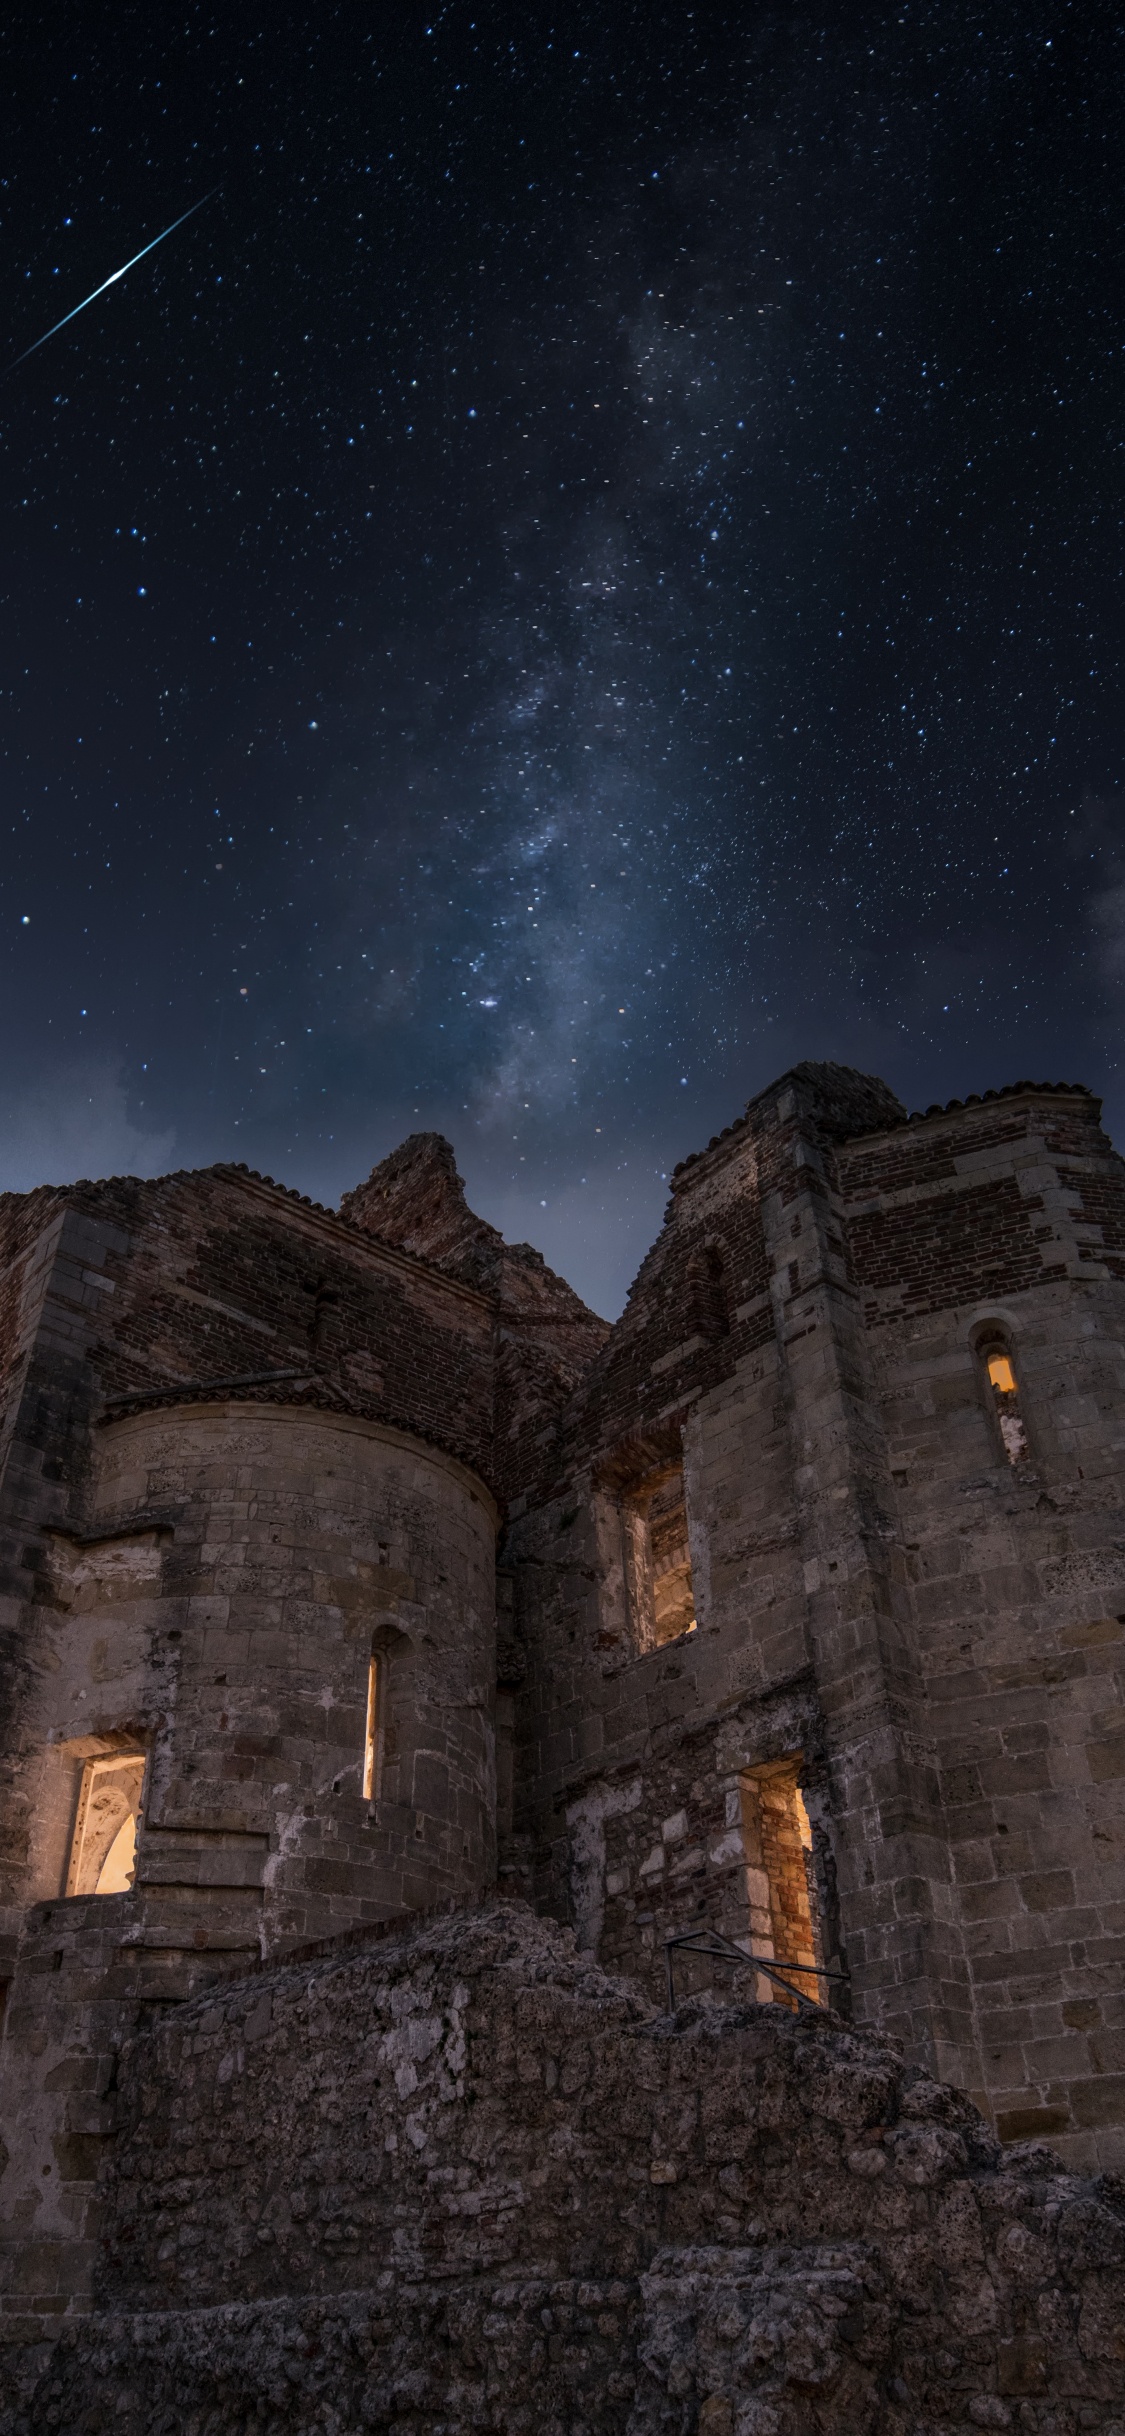 Nuit, Ruines, Atmosphère, Histoire Ancienne, Ciel. Wallpaper in 1125x2436 Resolution